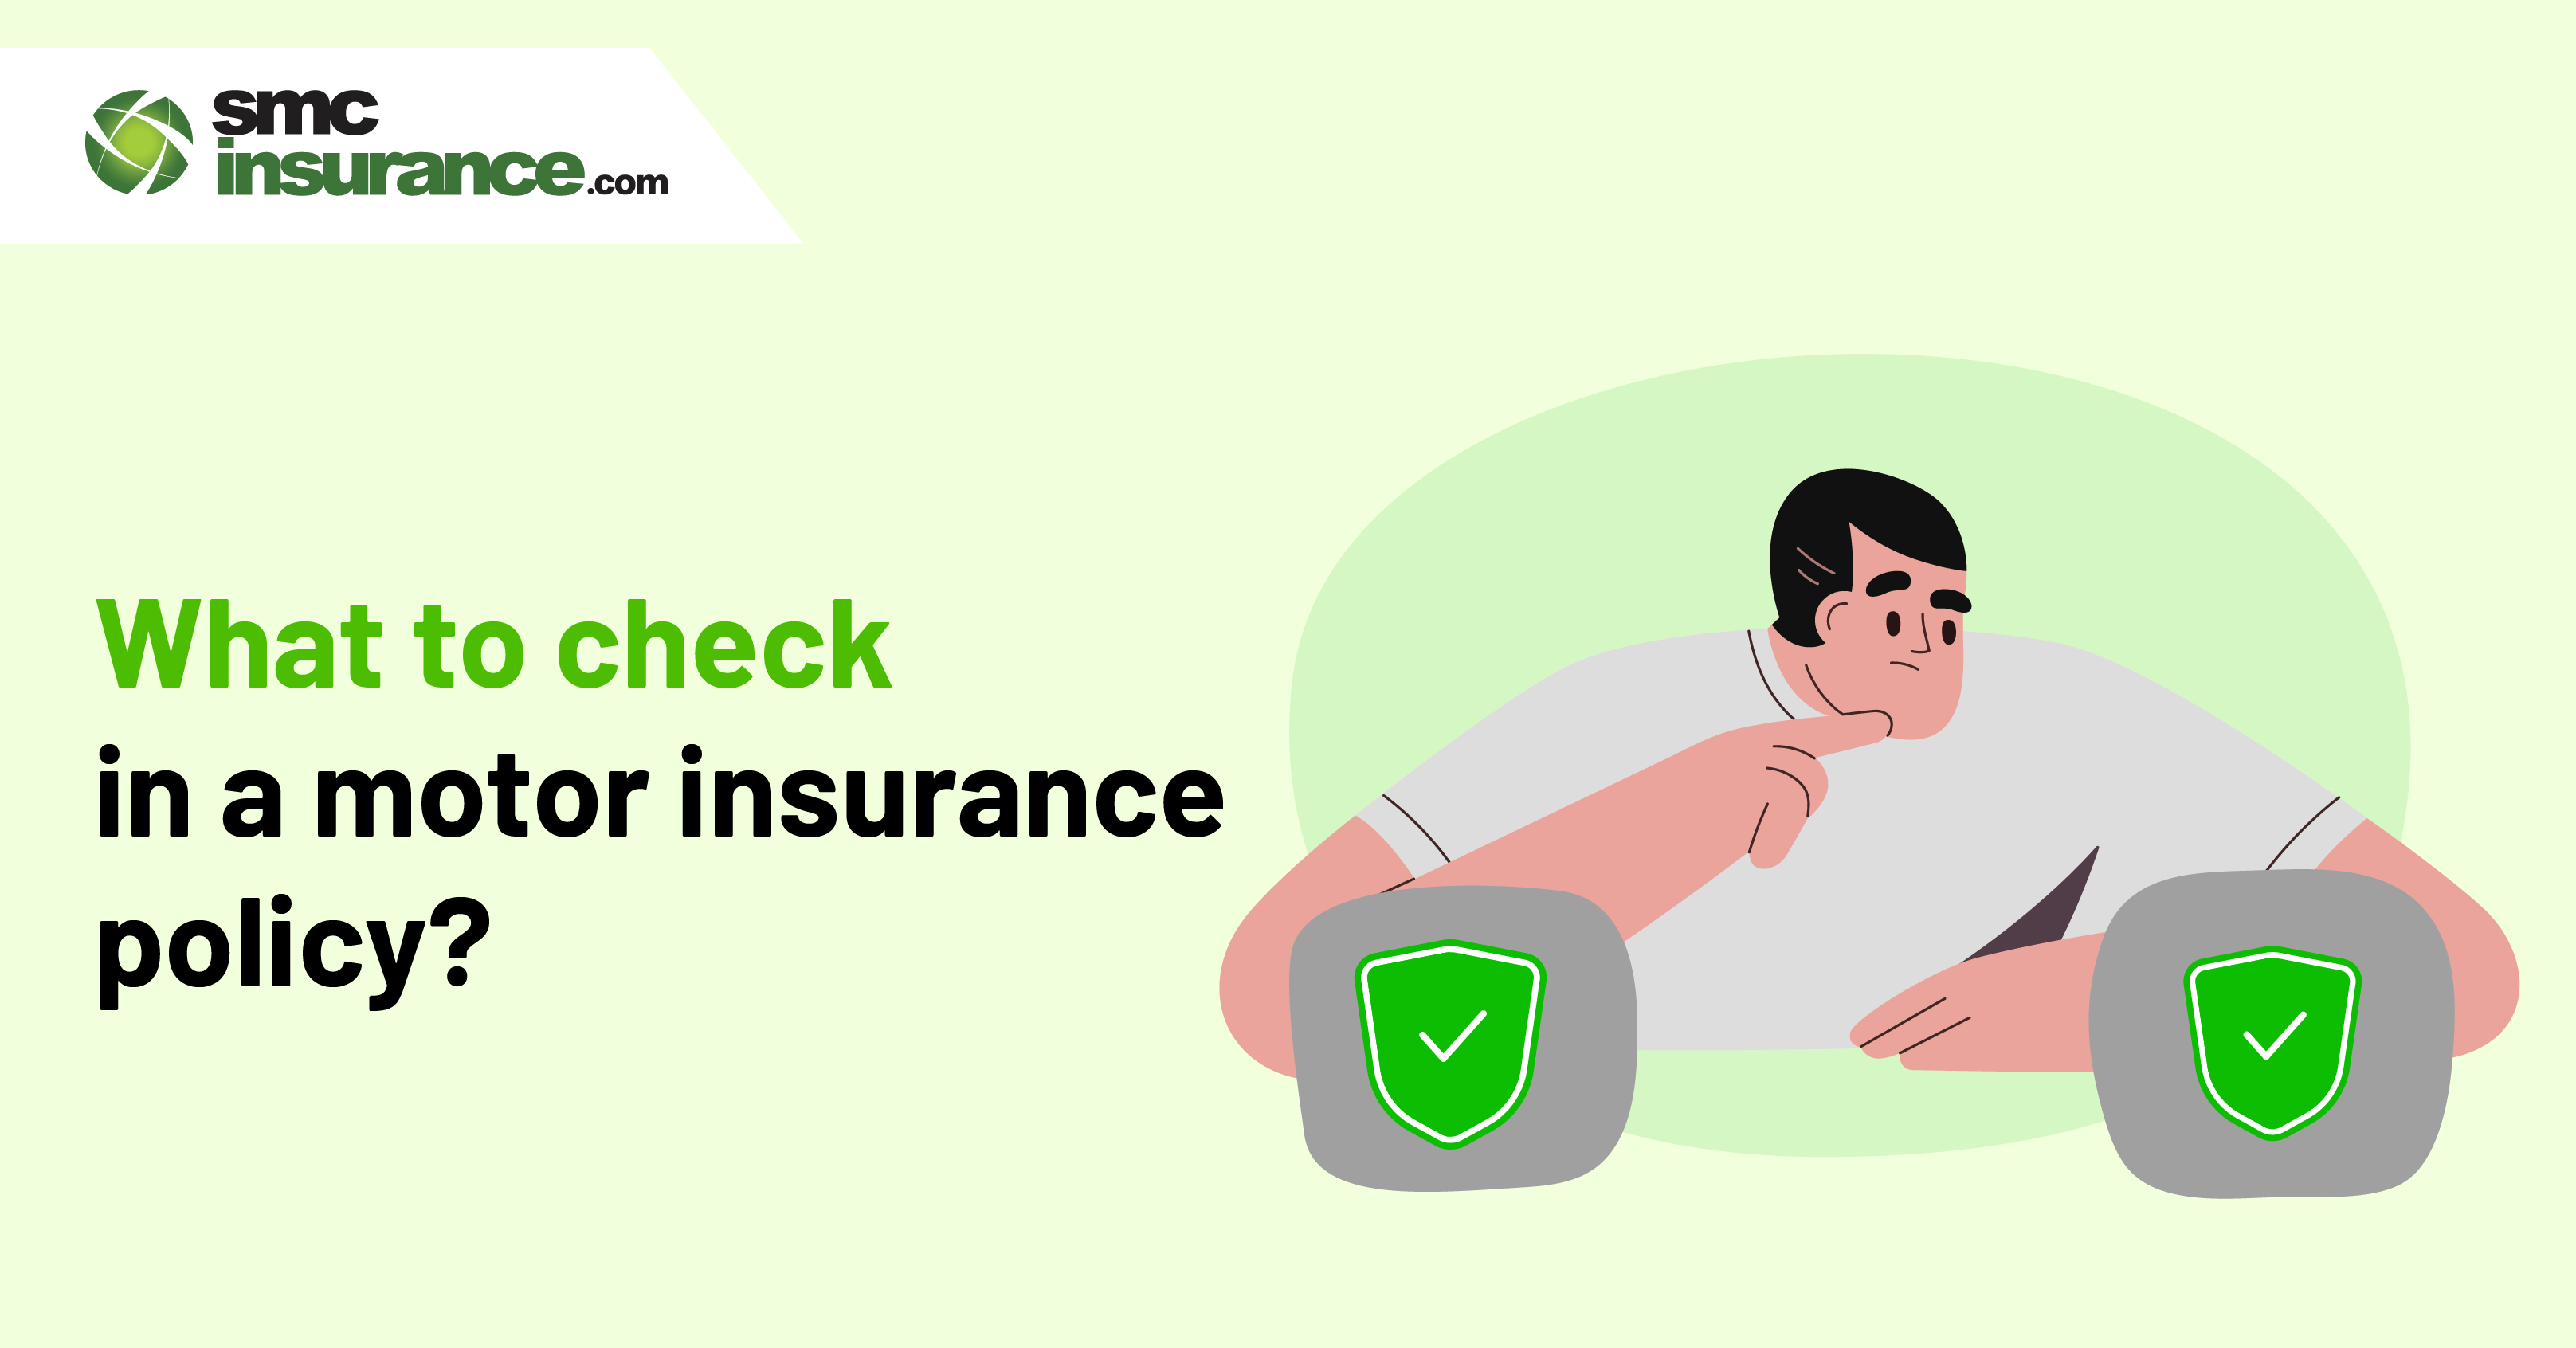 What to Check in a Motor Insurance Policy?